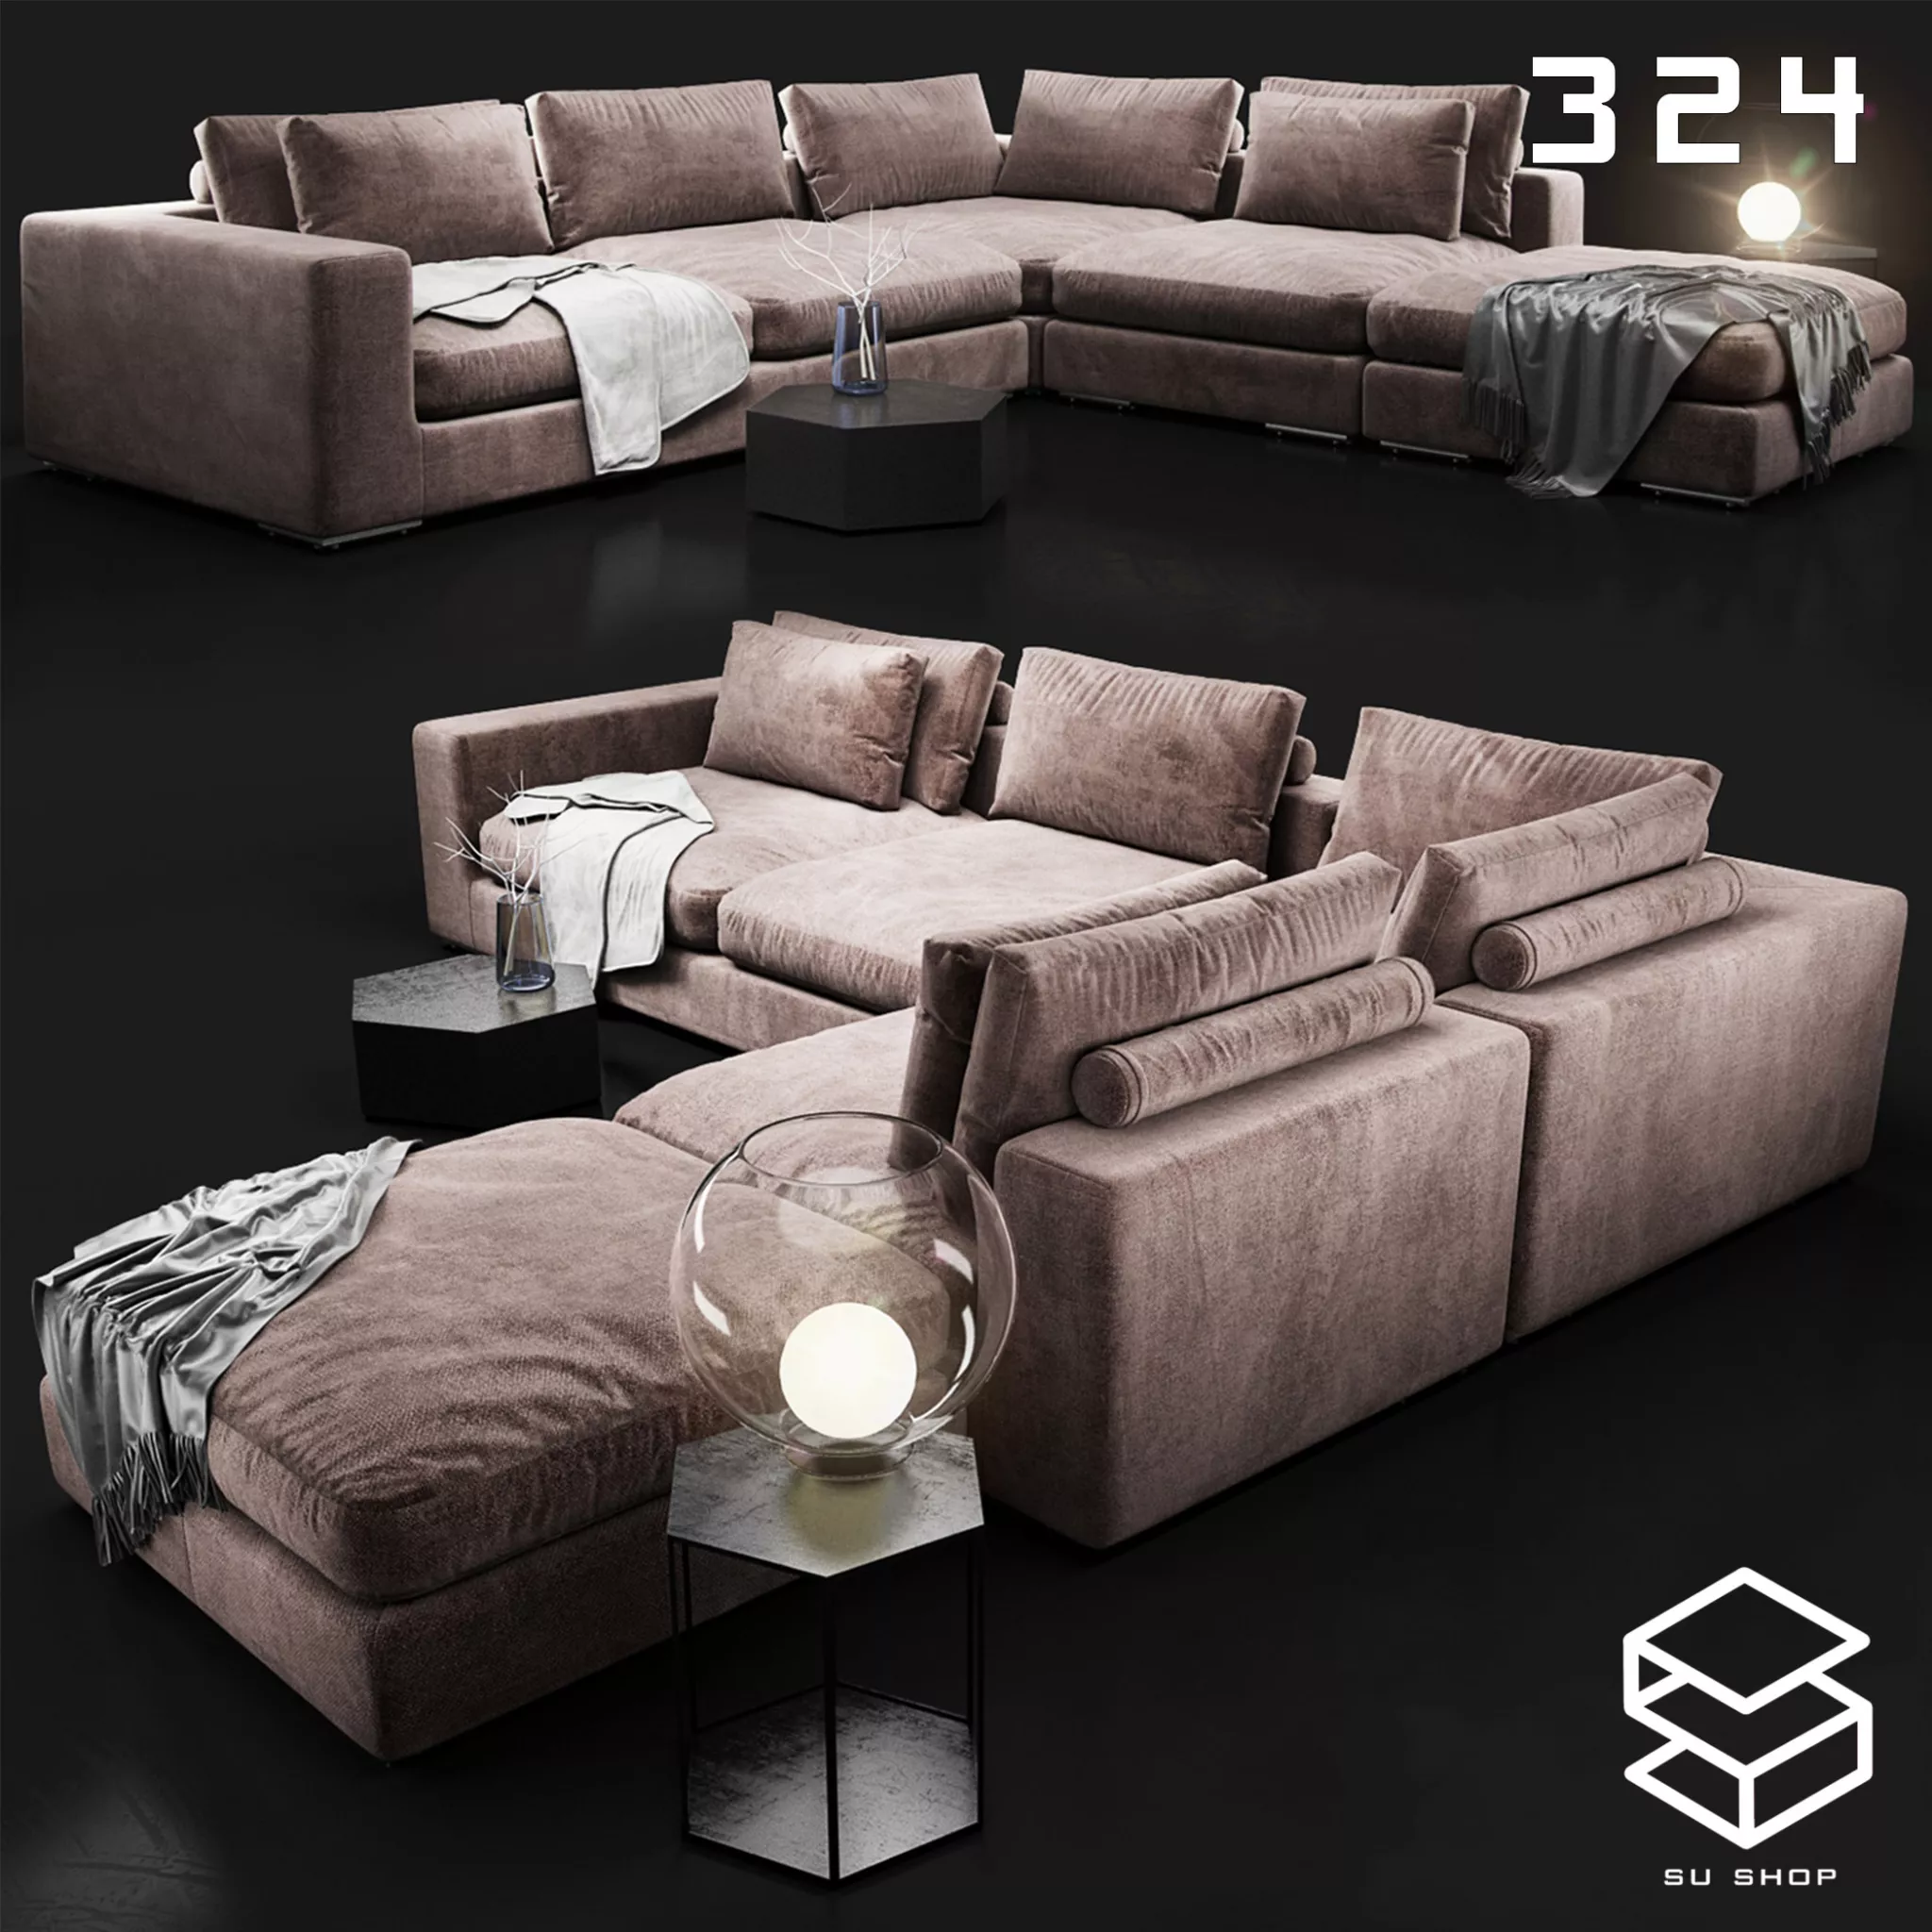 MODERN SOFA - SKETCHUP 3D MODEL - VRAY OR ENSCAPE - ID13635